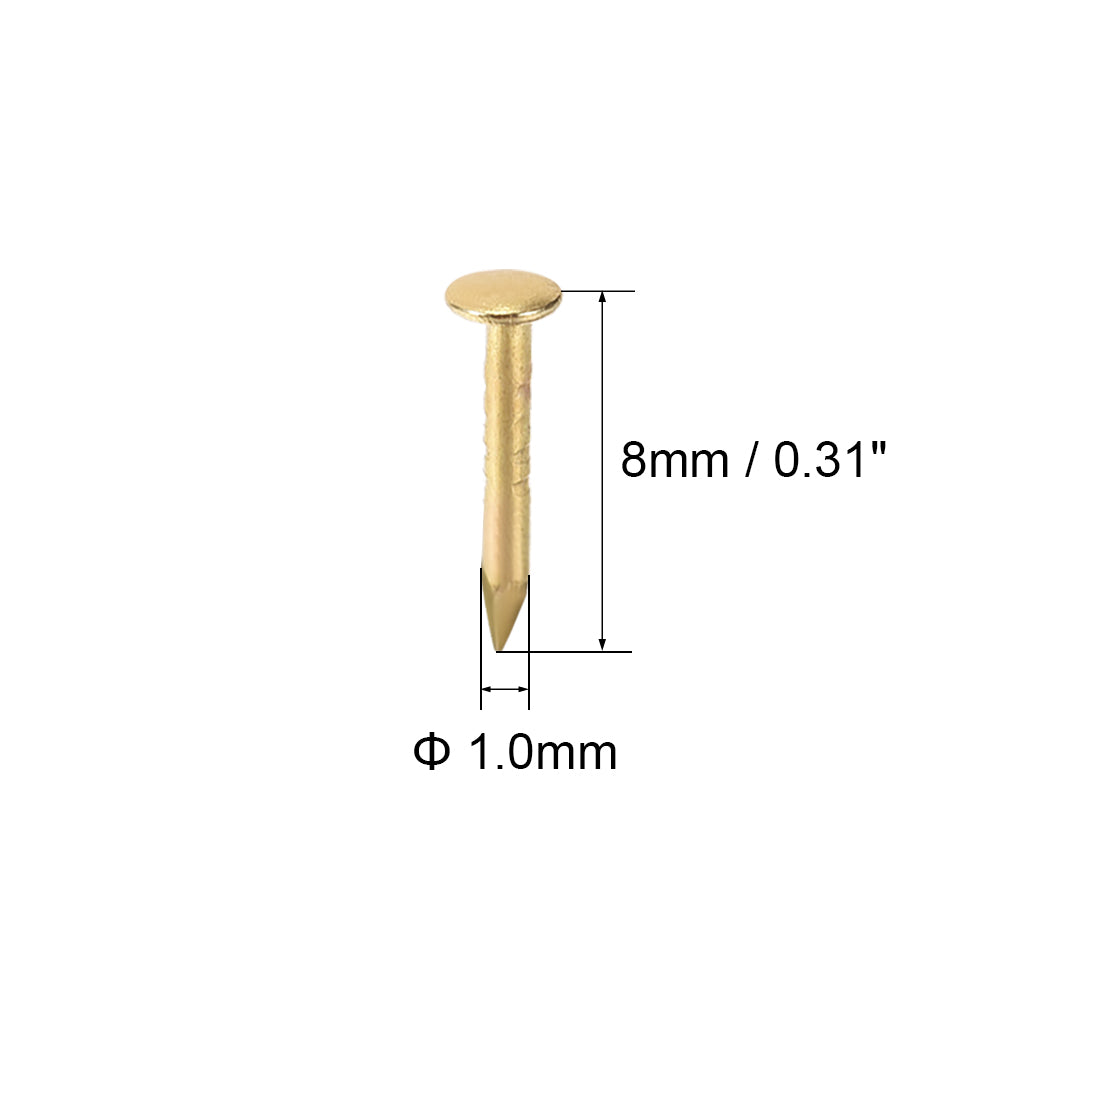 uxcell Uxcell Small Tiny Nails 1X8mm for DIY Decorative Pictures Wooden Boxes Household Accessories Gold Tone 250pcs